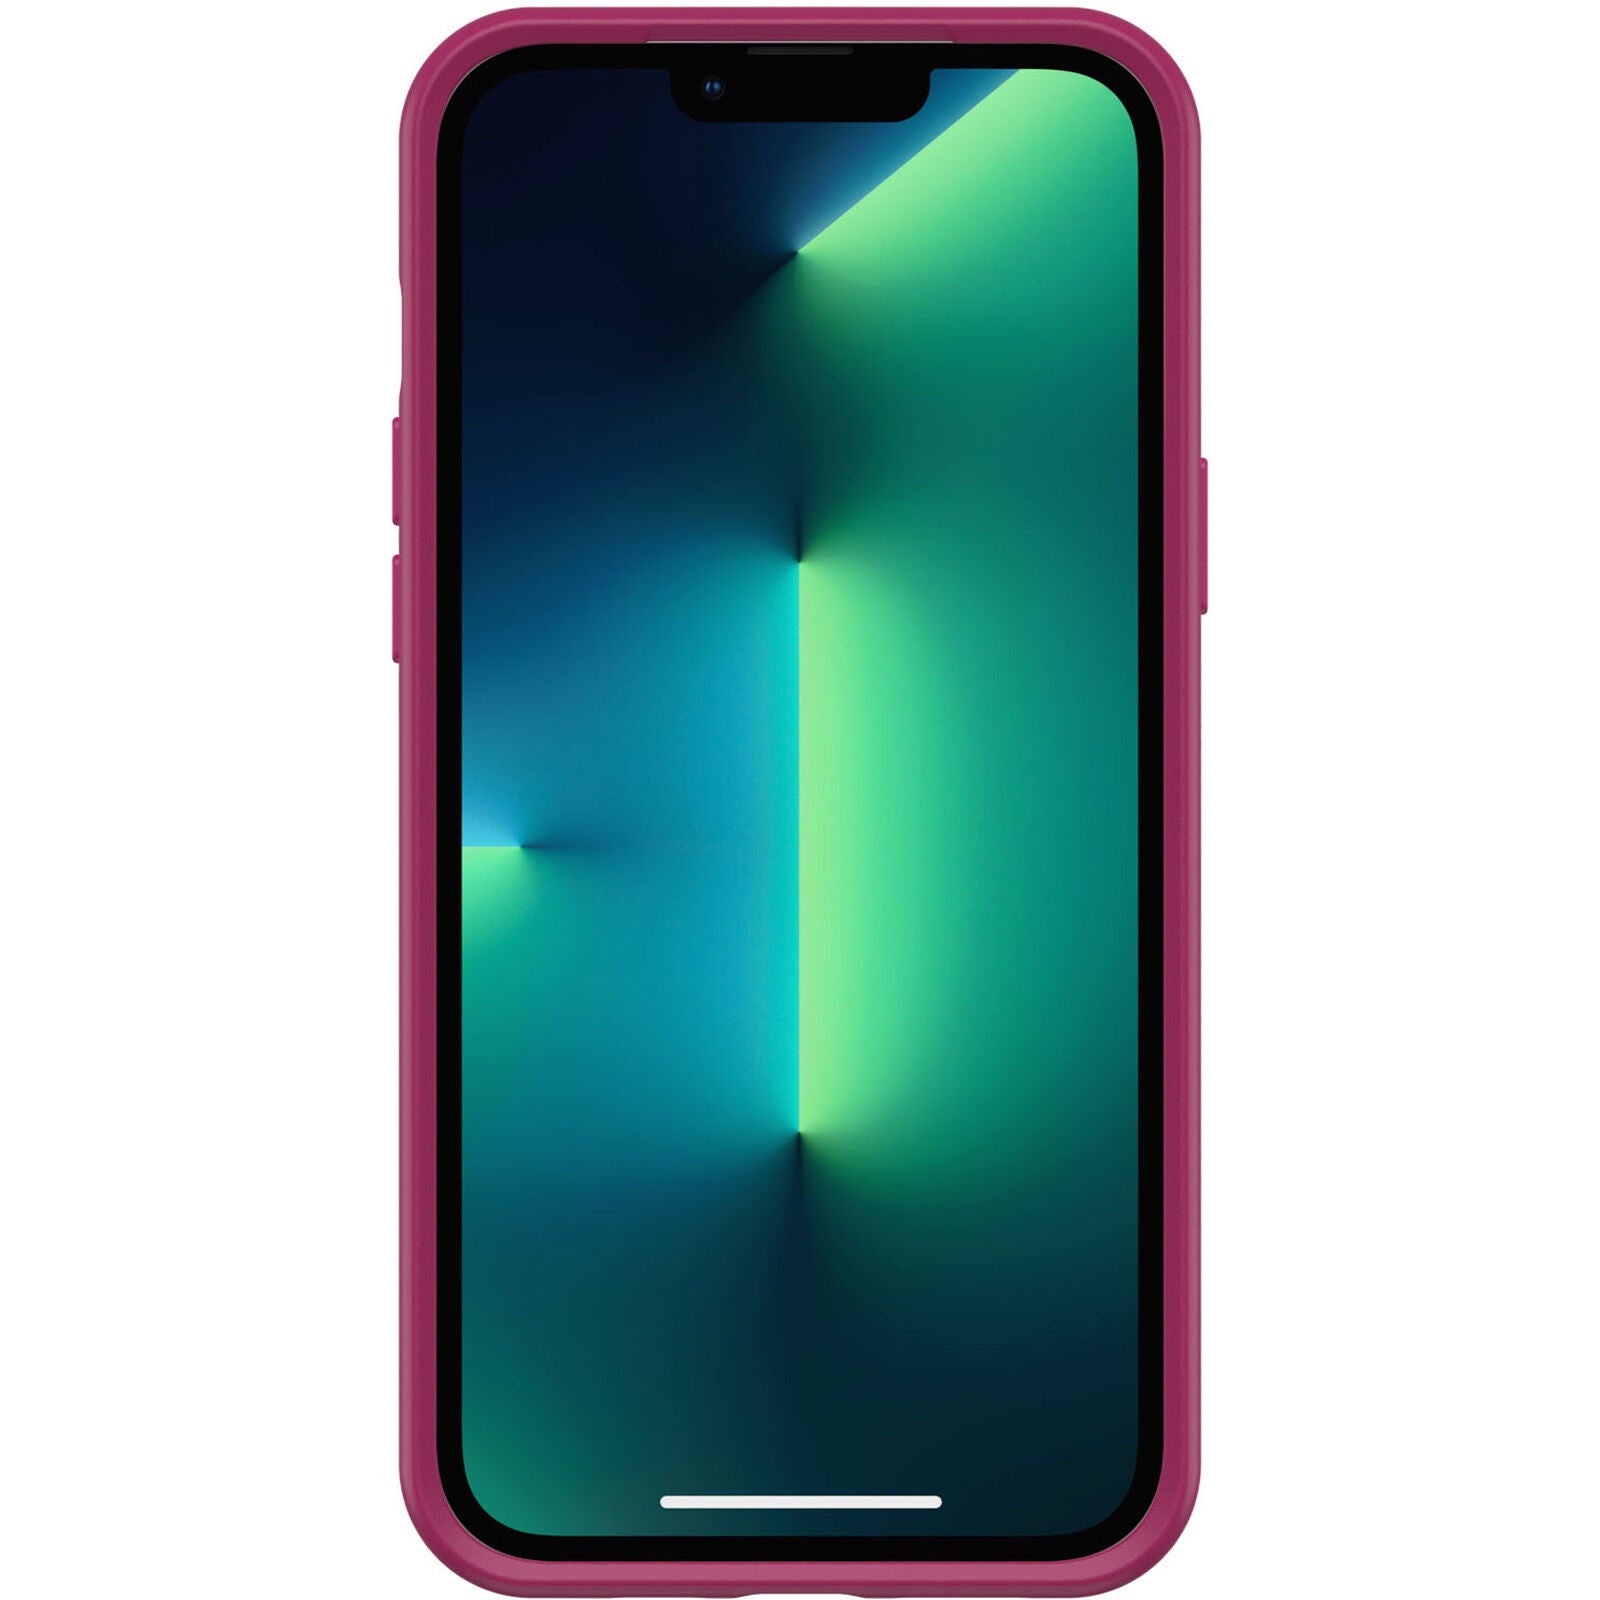 OtterBox SYMMETRY SERIES Case for Apple iPhone 13 Pro Max - Renaissance Pink (New)